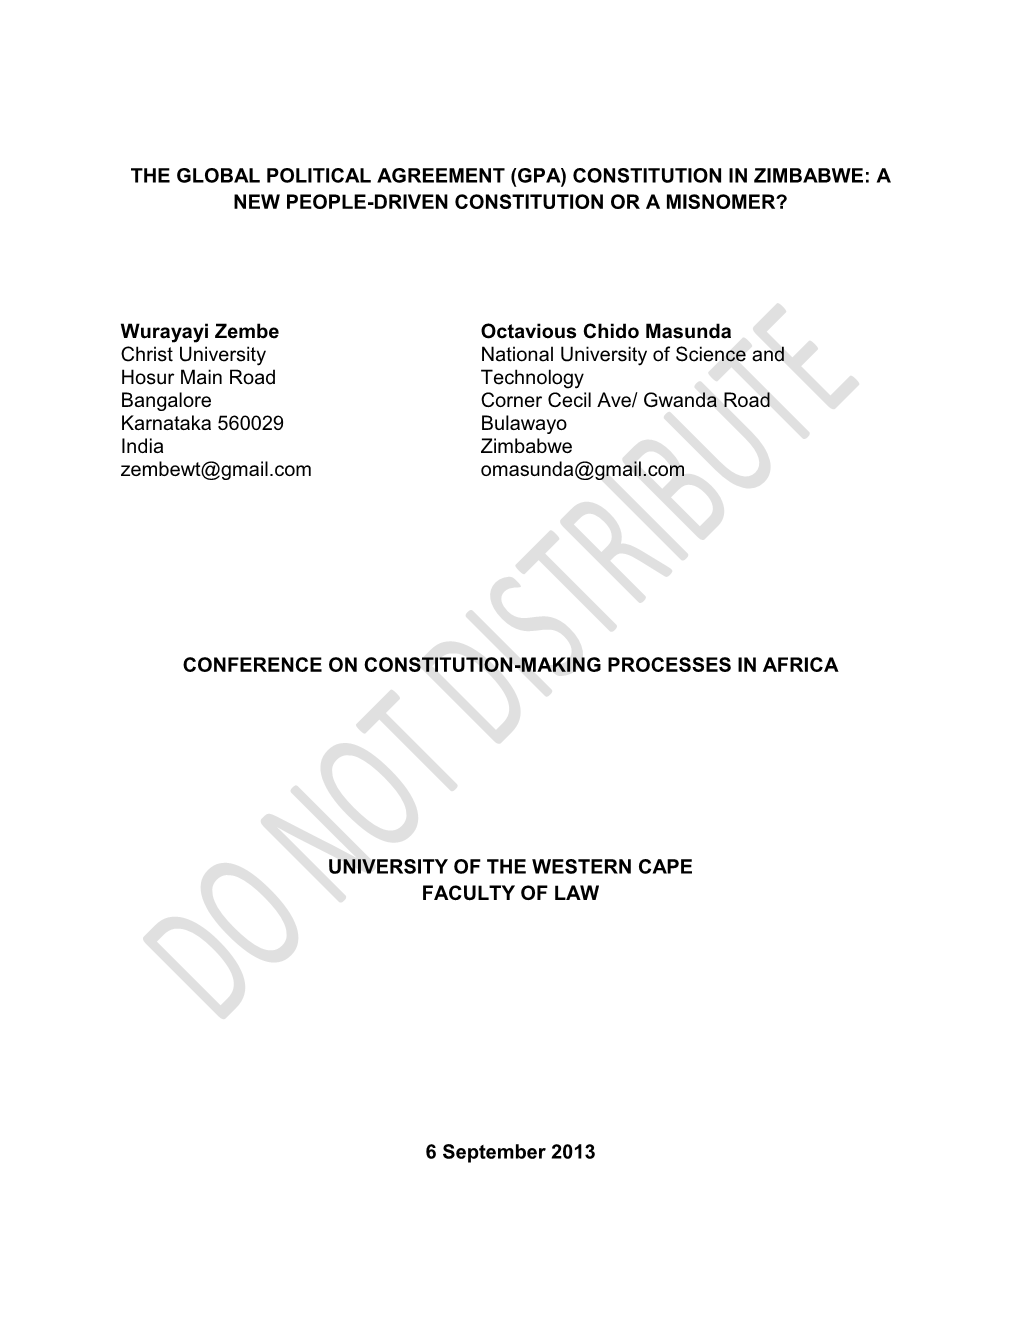 The Global Political Agreement (Gpa) Constitution in Zimbabwe: a New People-Driven Constitution Or a Misnomer?